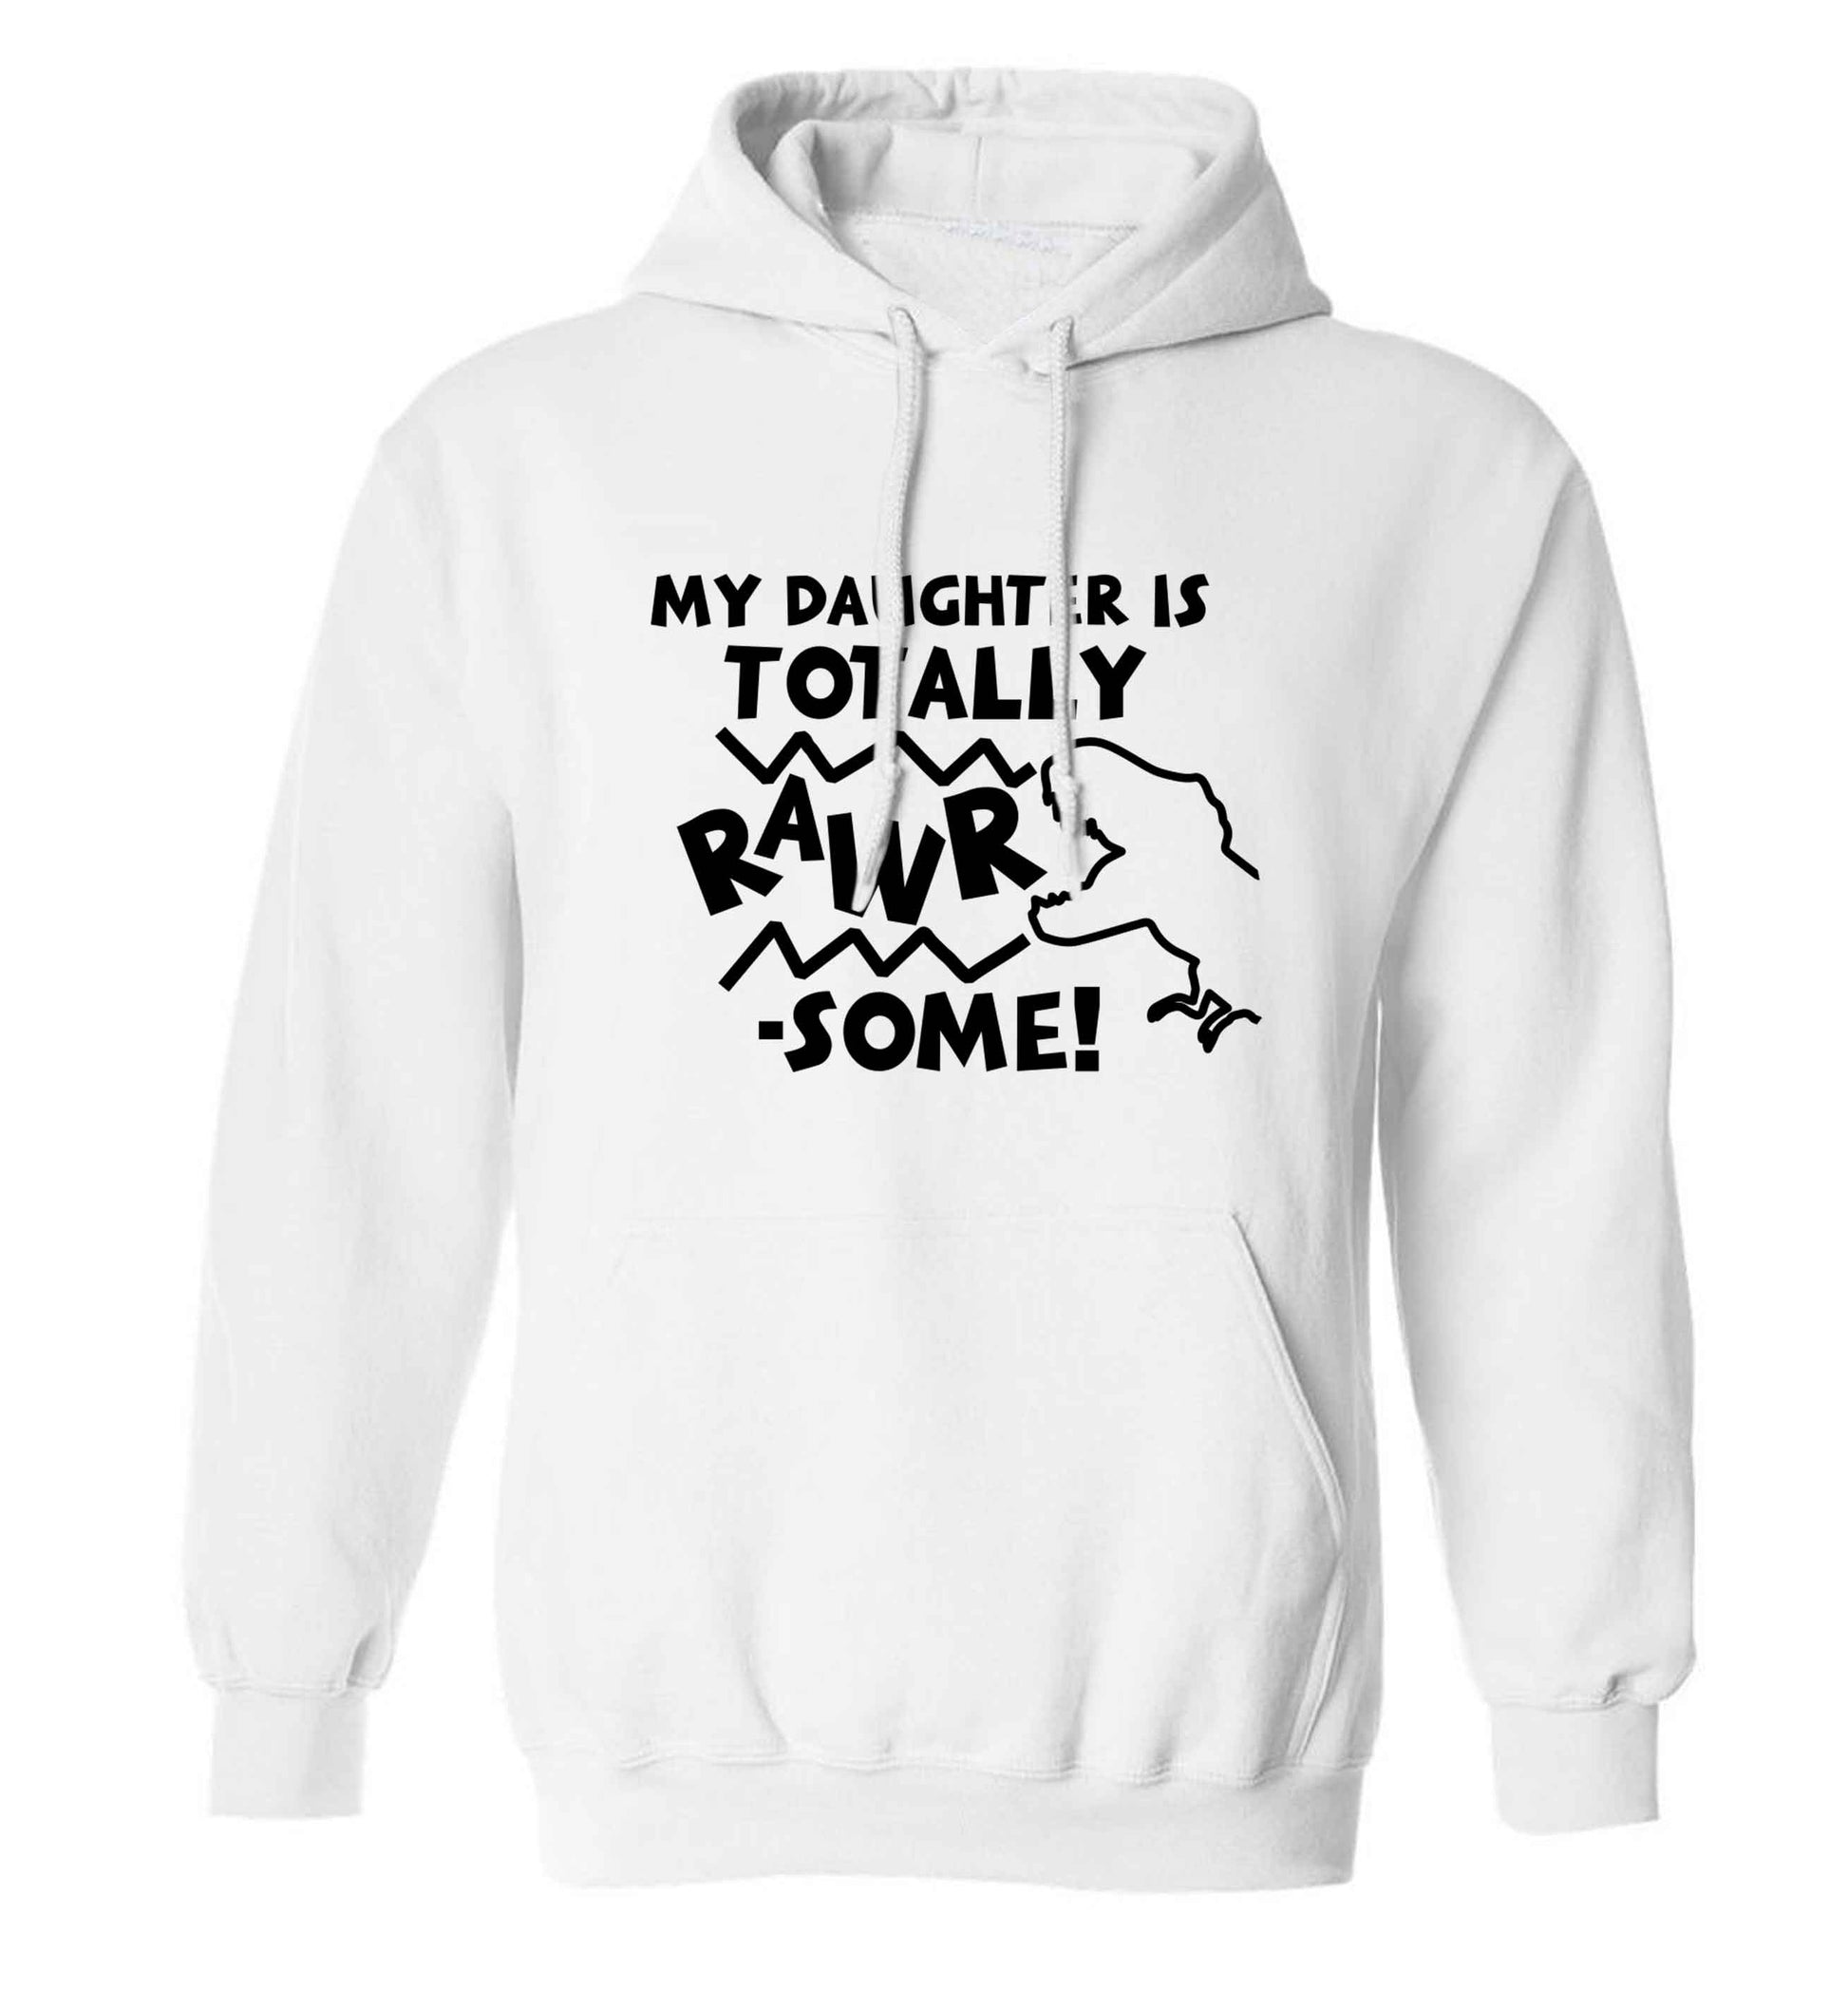 My daughter is totally rawrsome adults unisex white hoodie 2XL